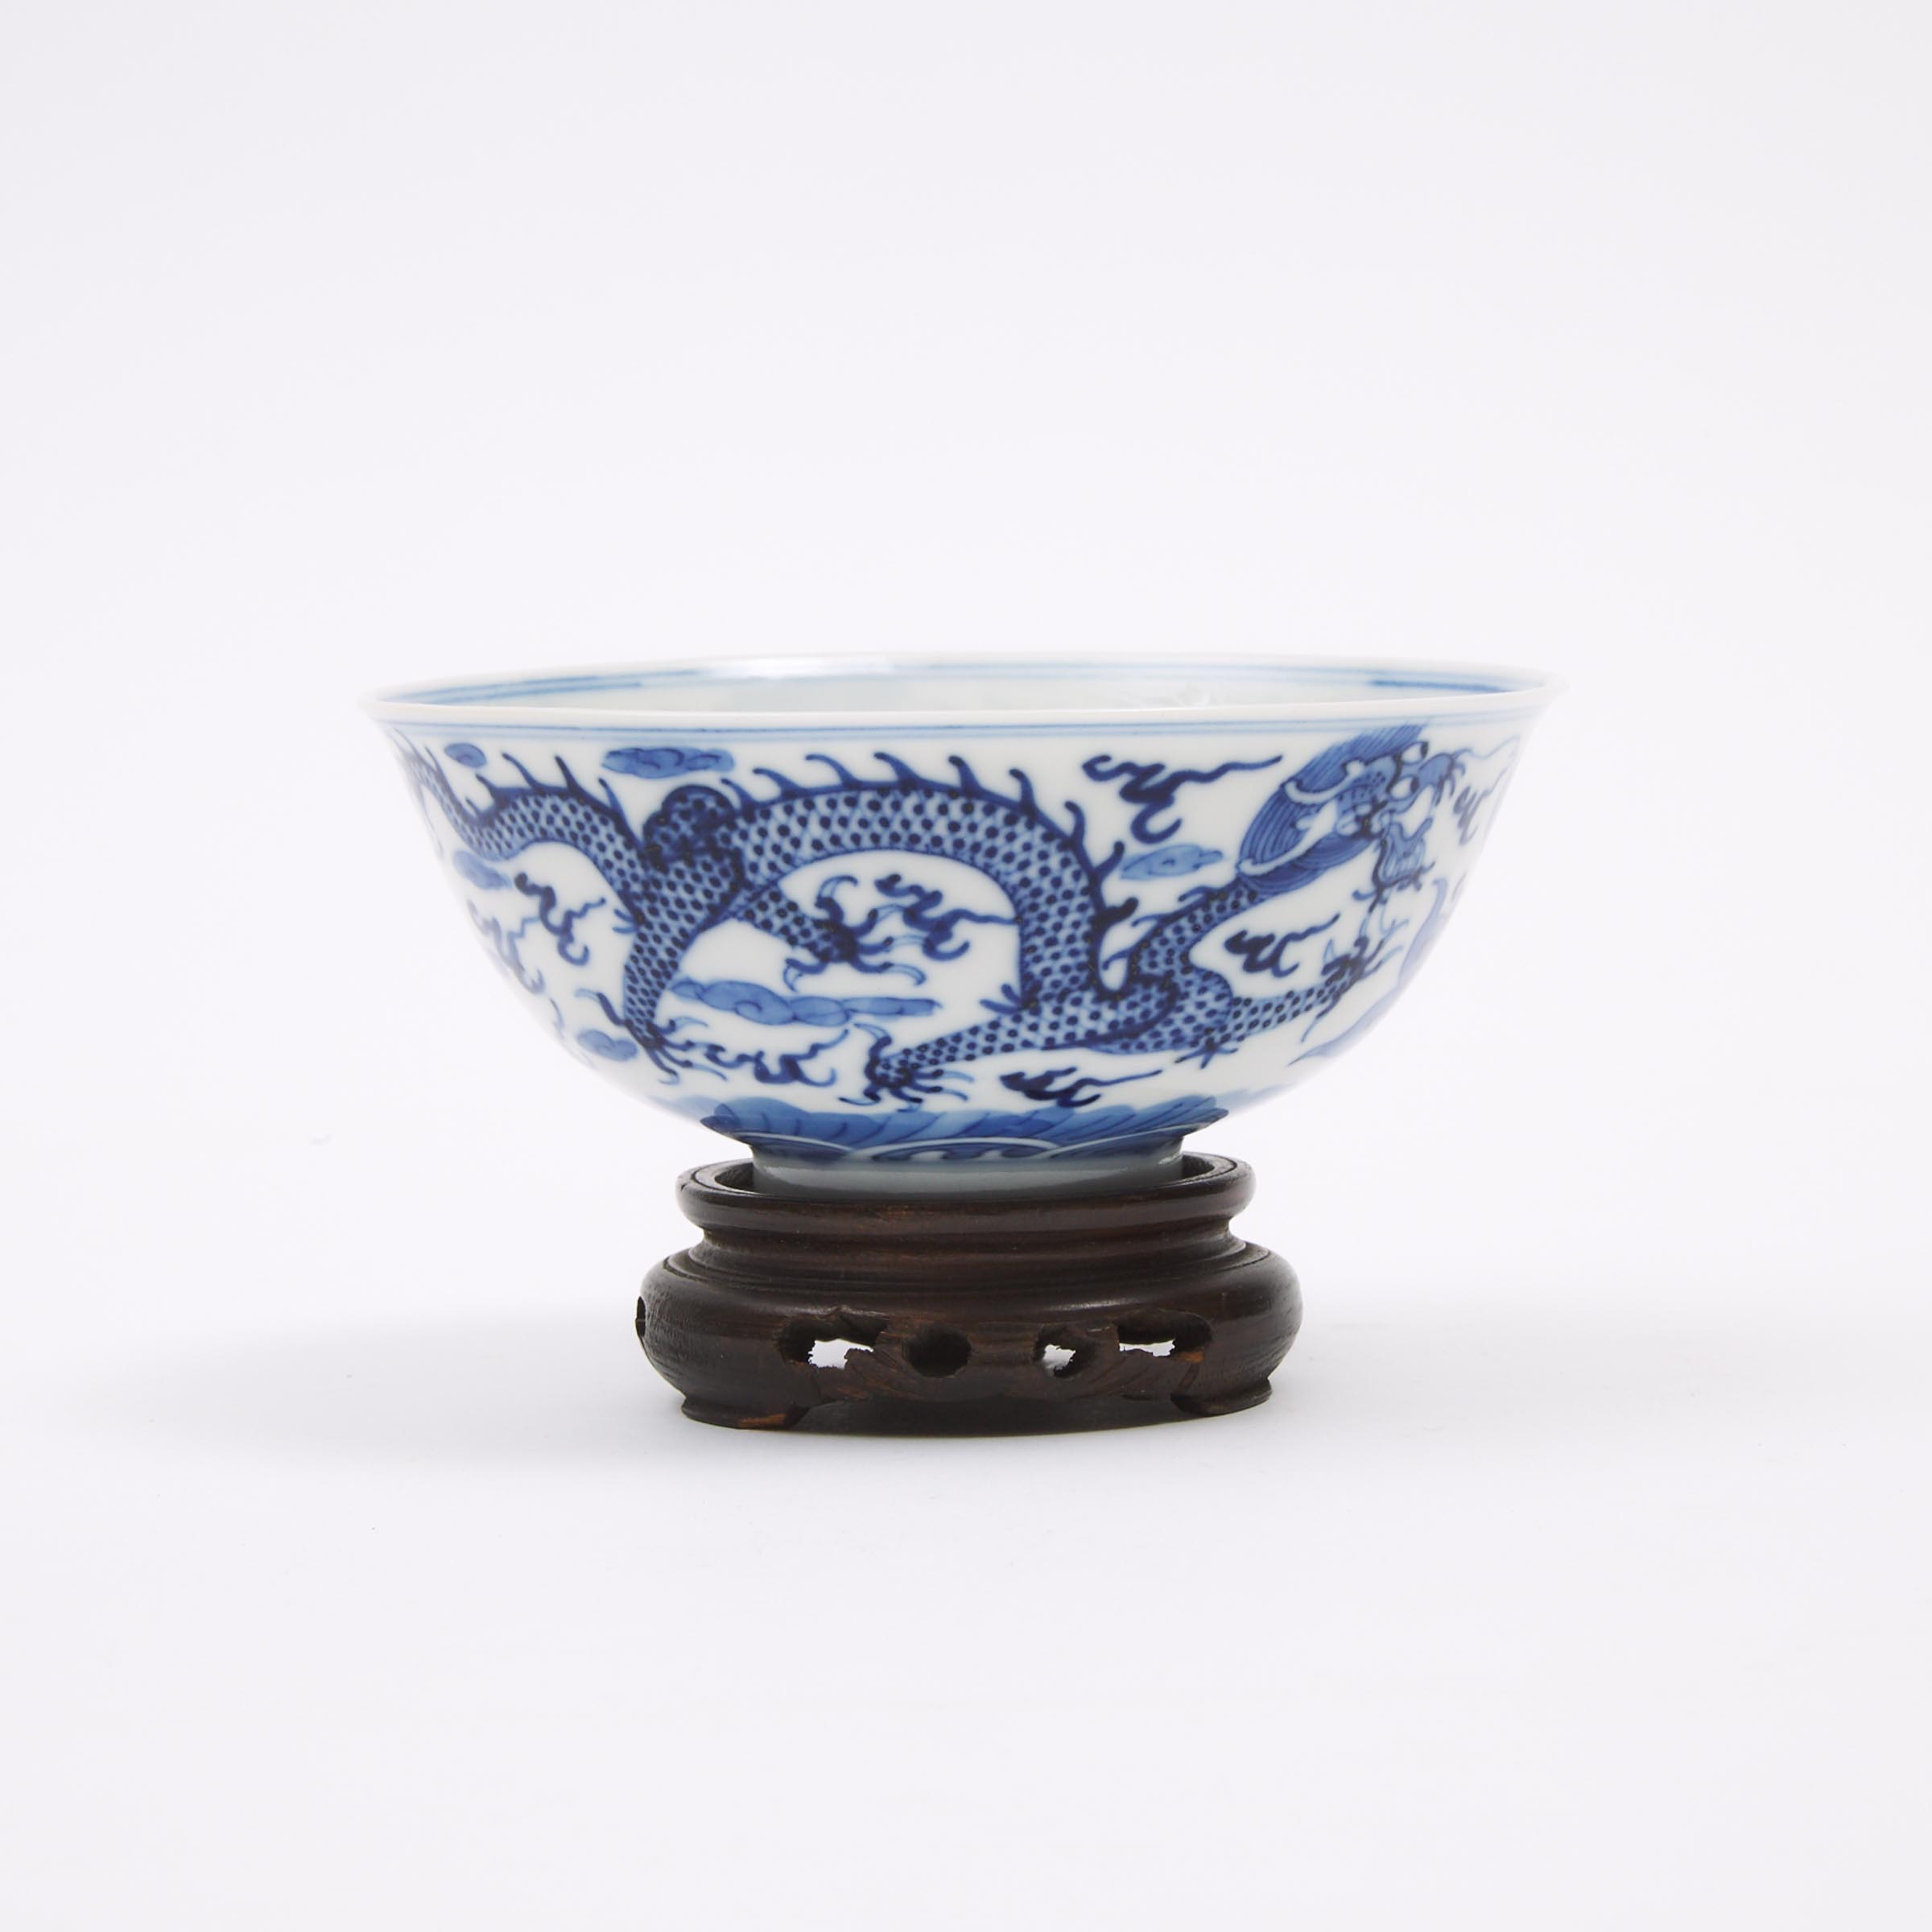 A Blue and White 'Dragon' Bowl, Guangxu Mark, Early 20th Century